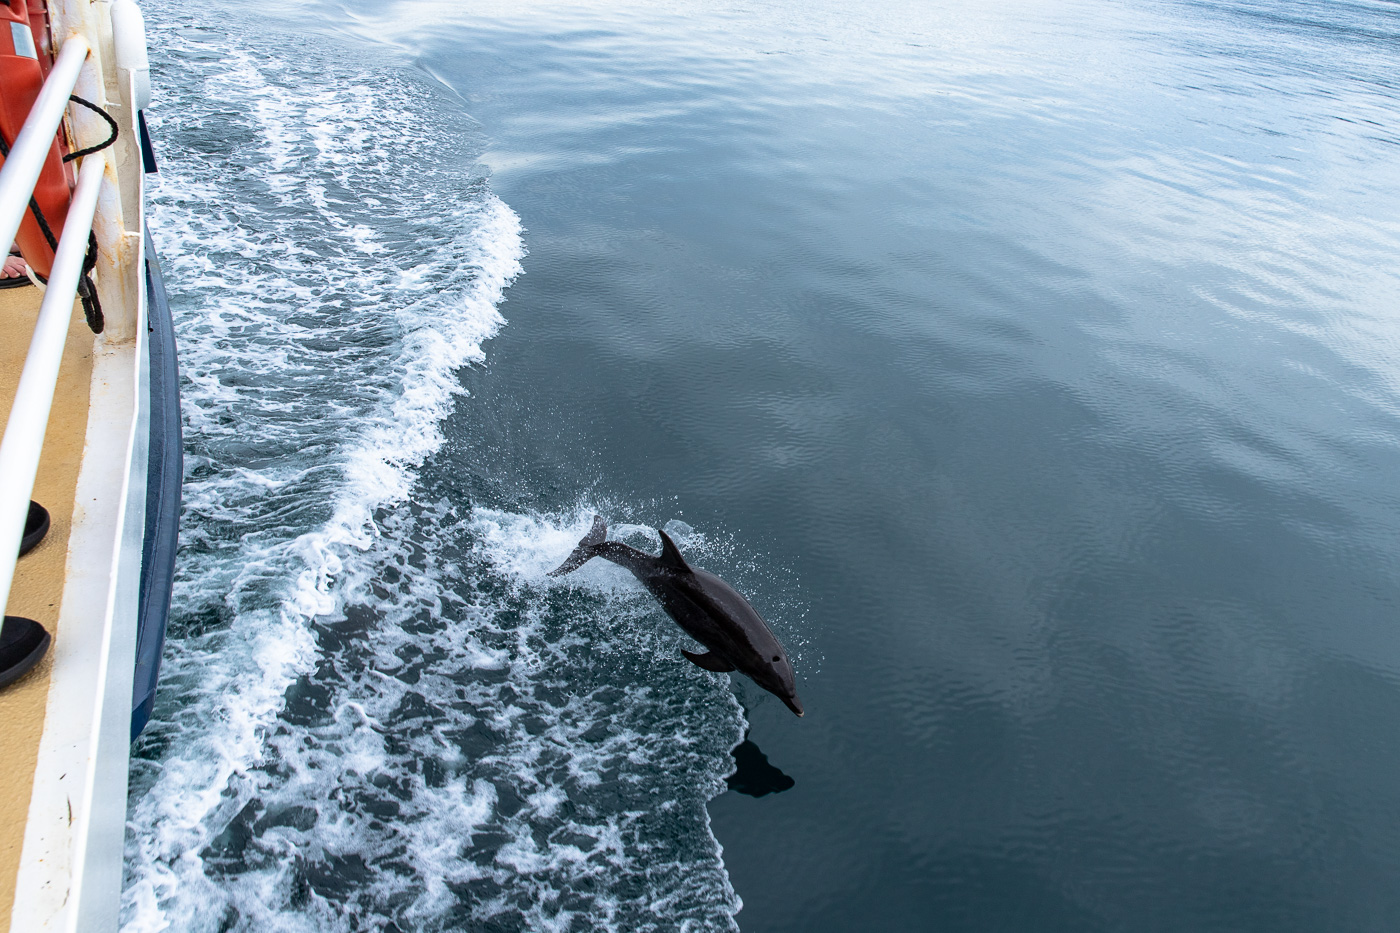 UnCruise dolphin jumping as seen on an adventure cruise